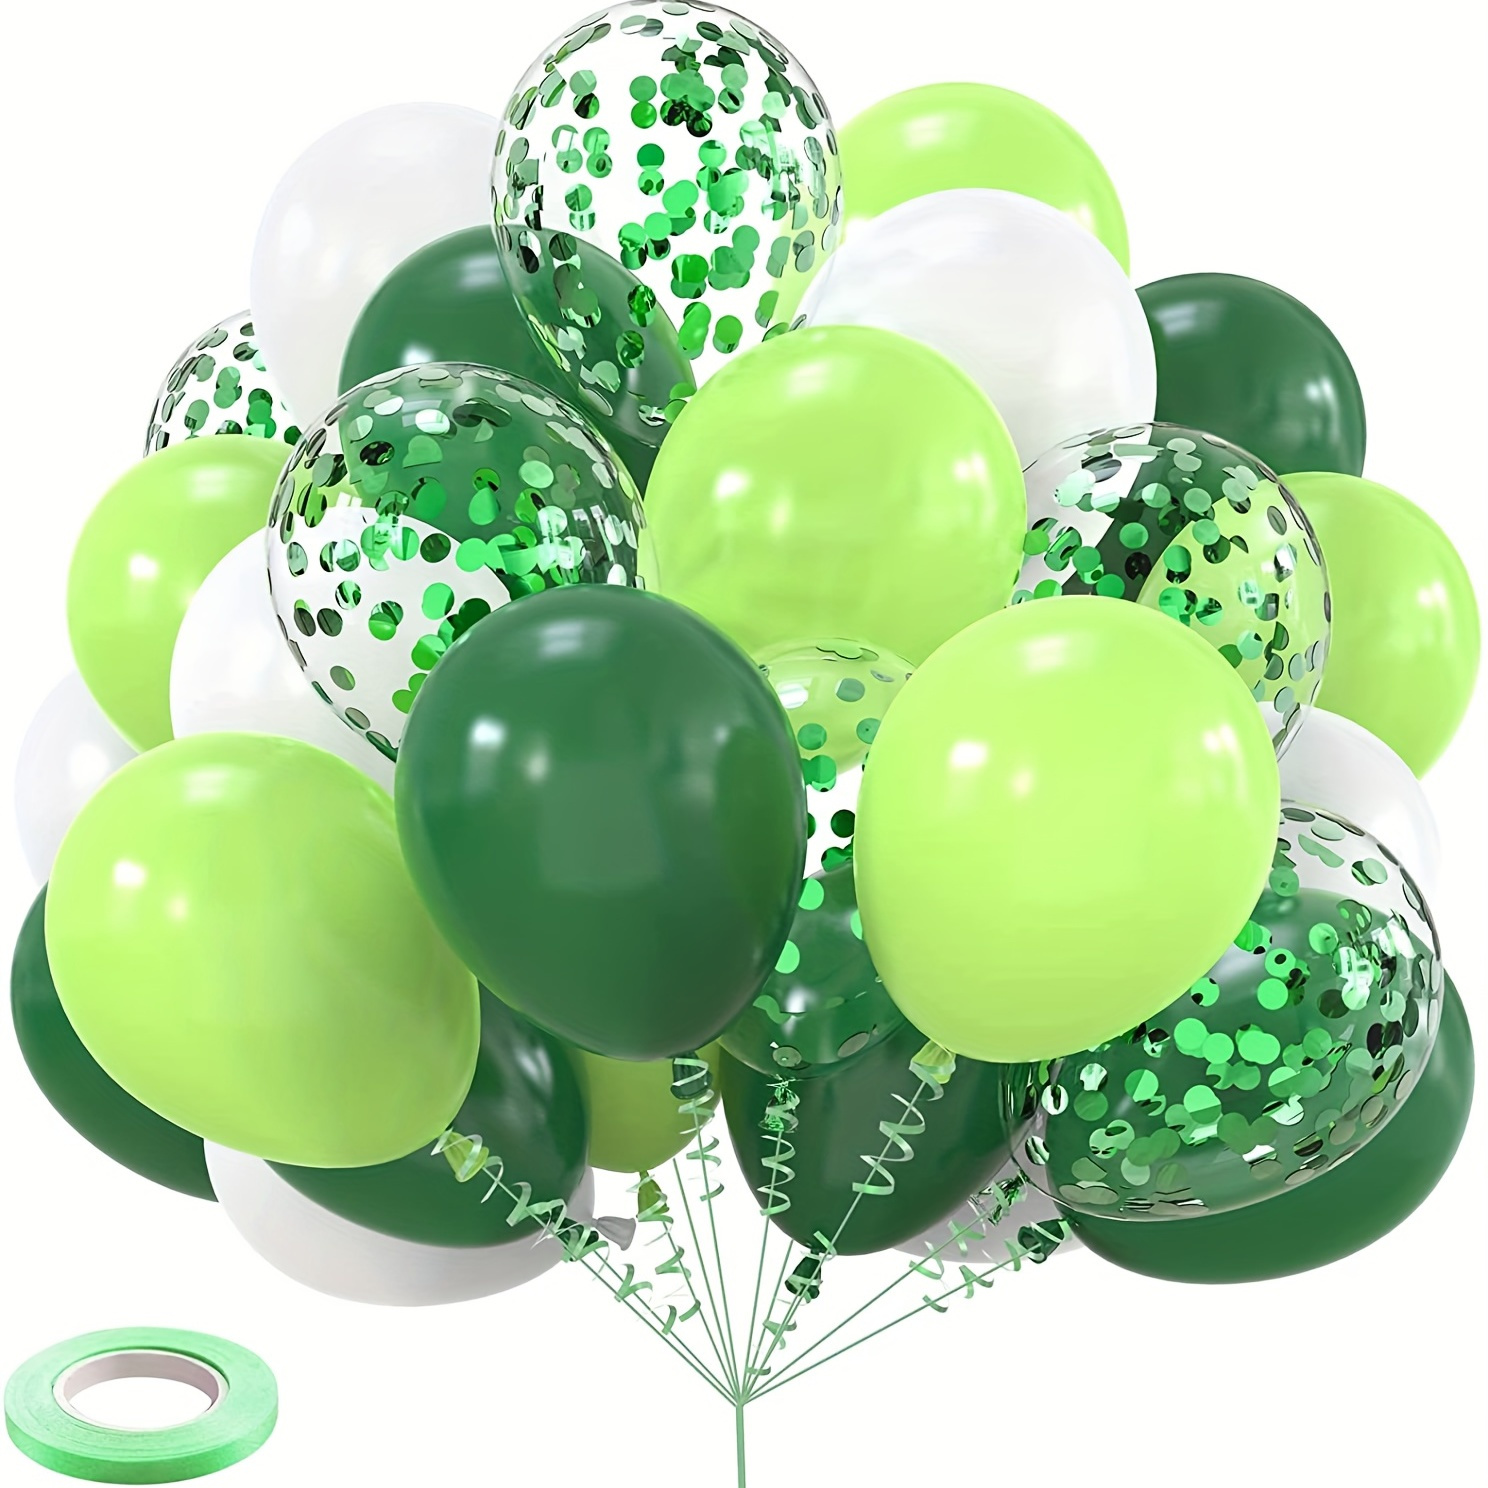 

Set/40pcs, Green And White Balloon Party Balloons With 33ft Ribbon - Jungle Party Decoration Green Confetti, Birthday Party - Strong Latex Balloon For Baby Shower